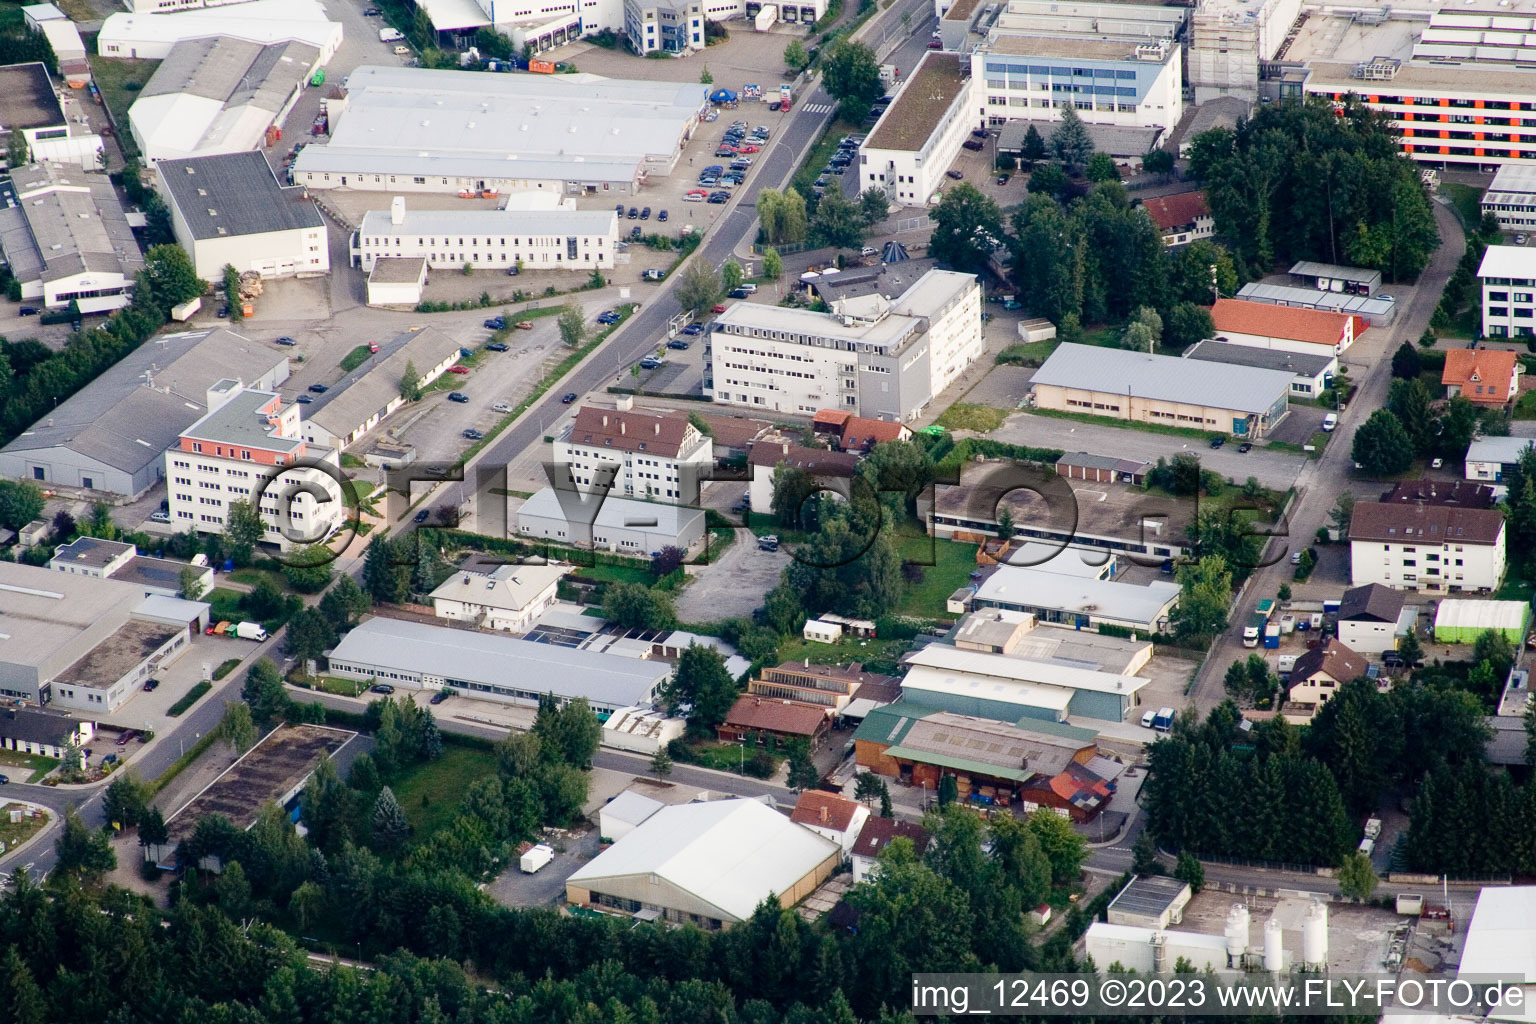 Ittersbach, industrial area in the district Im Stockmädle in Karlsbad in the state Baden-Wuerttemberg, Germany seen from above